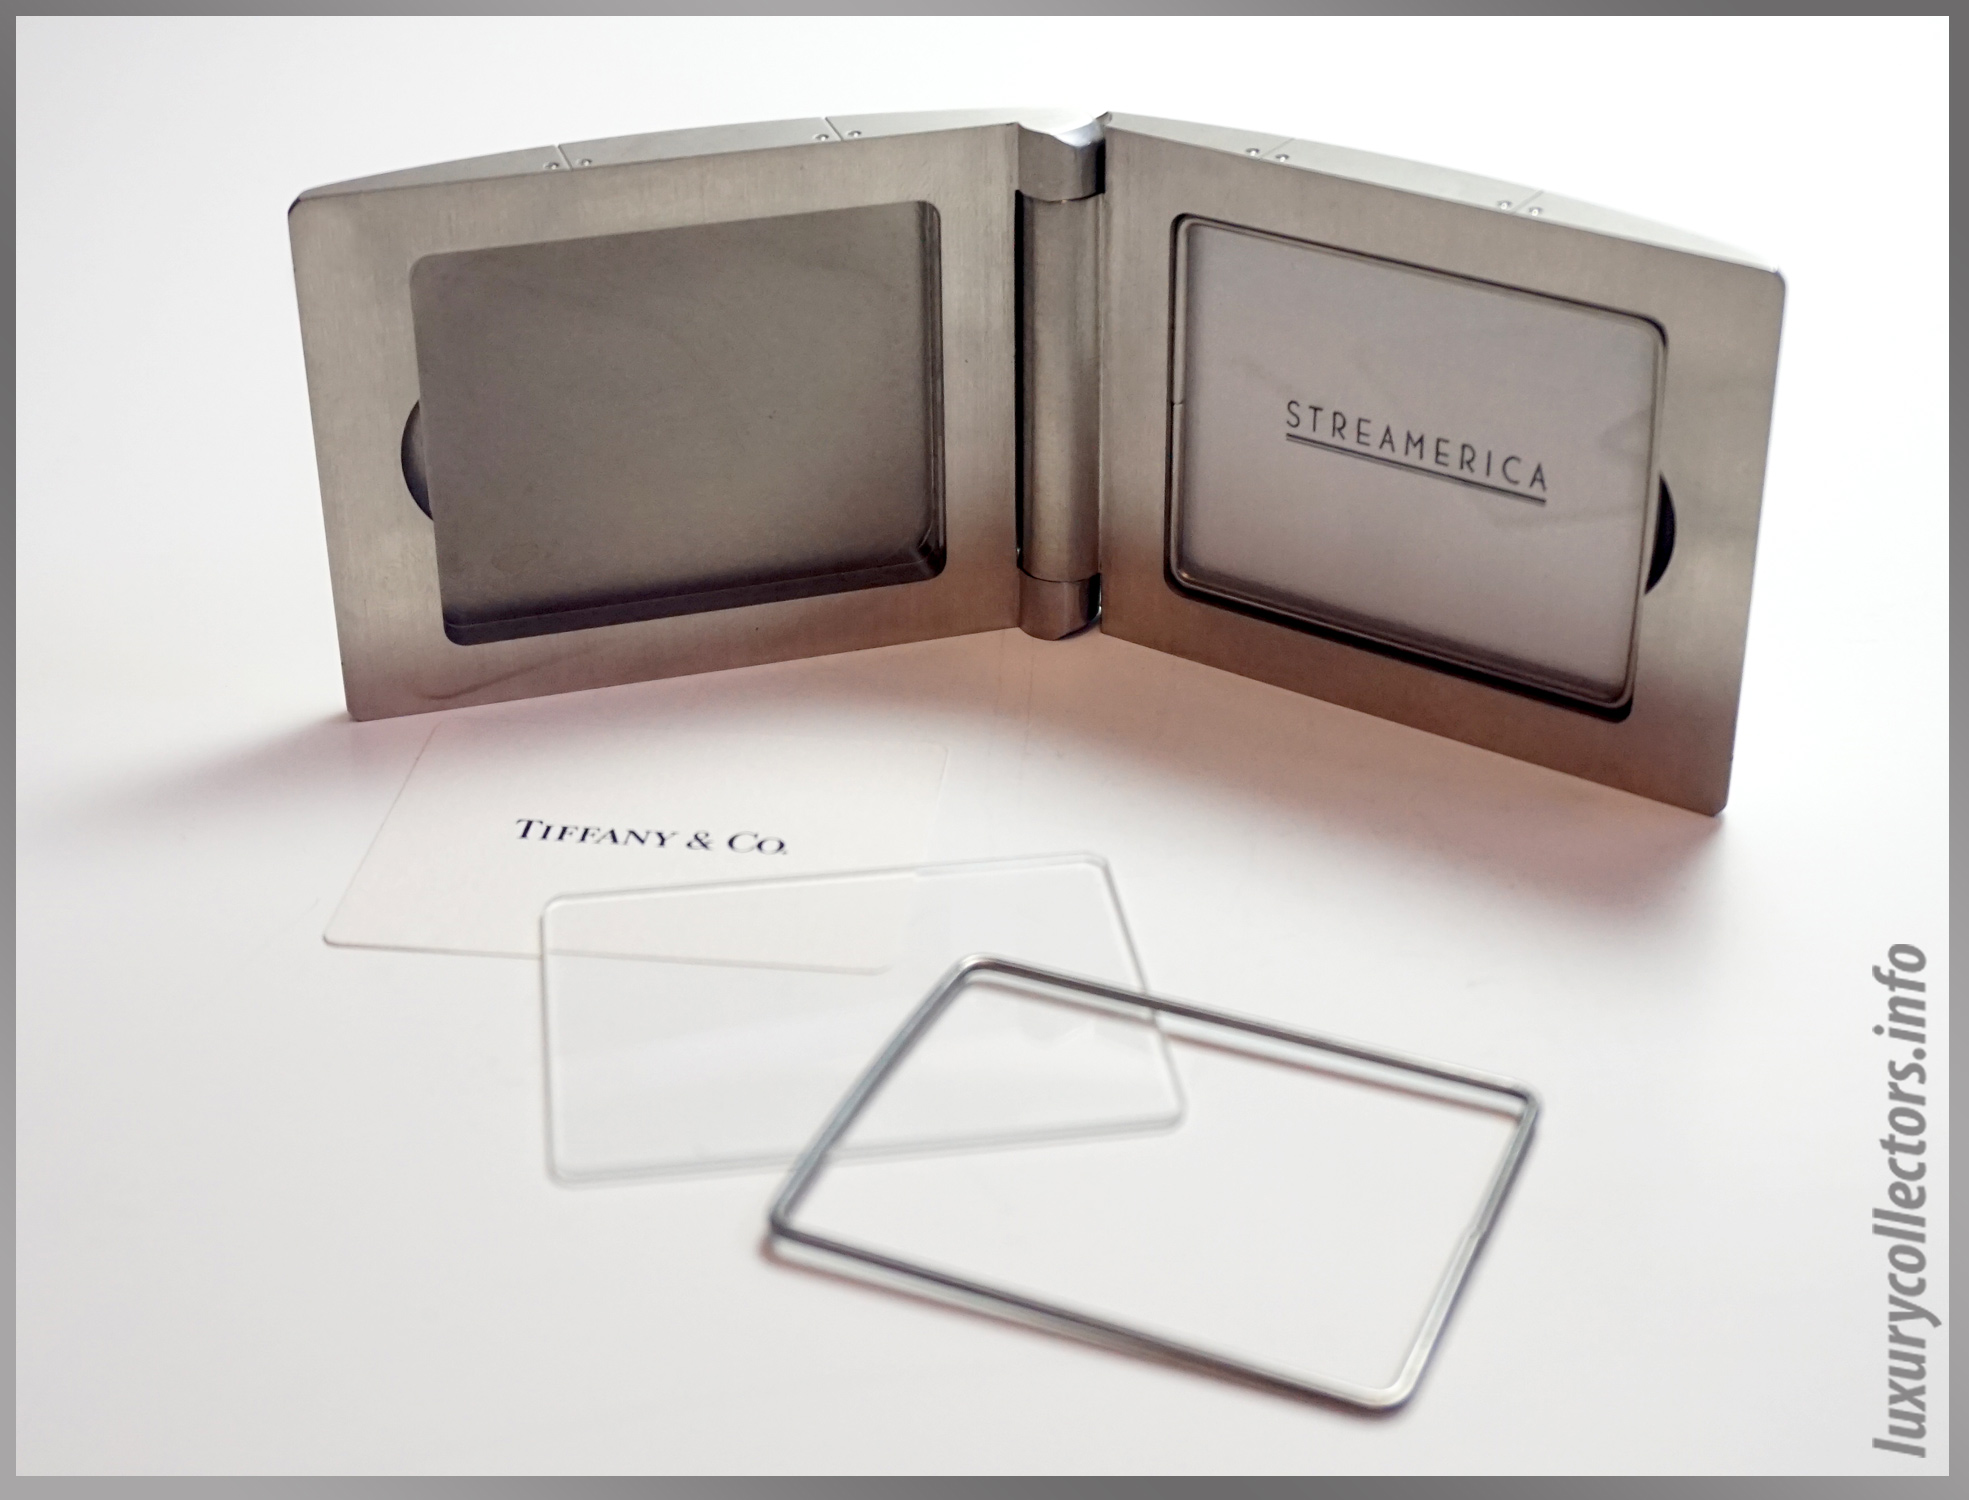 Opened Tiffany and & Co. Featured Image of Streamerica Metrozone Travel Fold Compact Photo Picture Frame in Stainless Steel